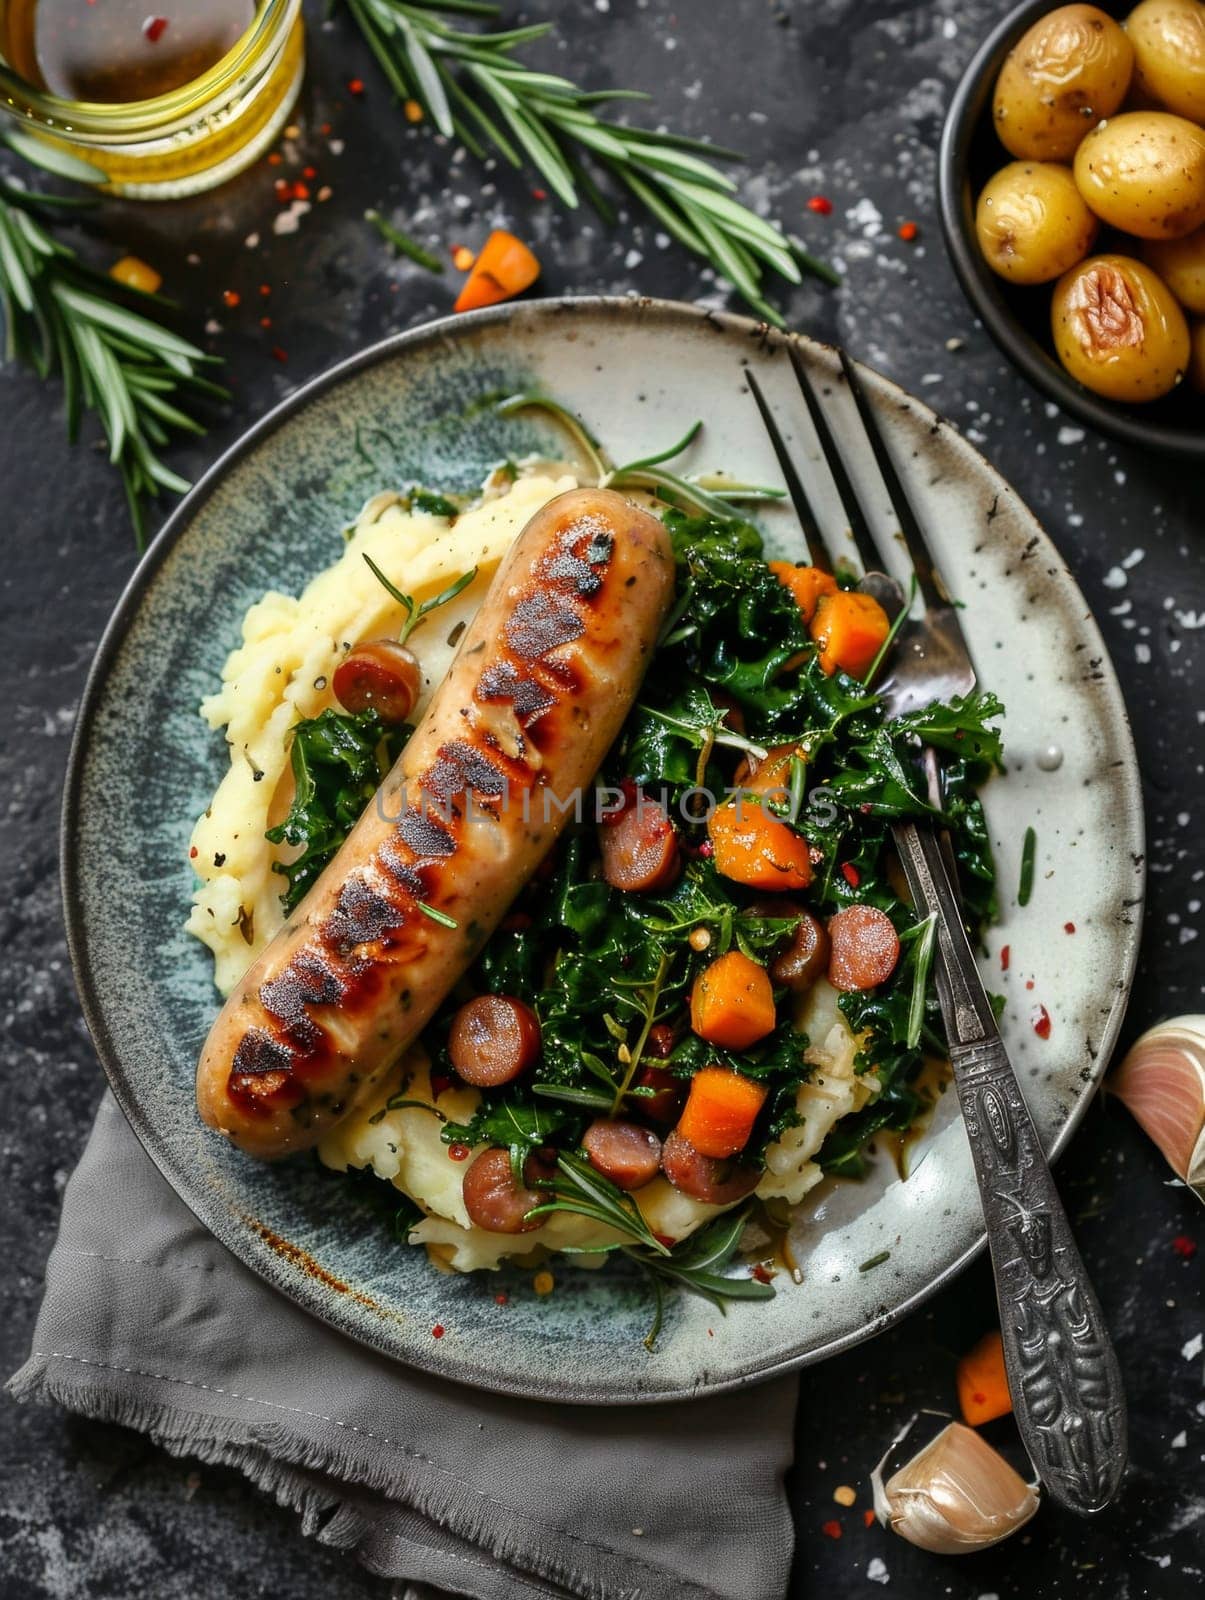 Dutch stamppot, a comforting dish of mashed potatoes mixed with kale, served with a flavorful smoked sausage. This traditional recipe showcases the heartwarming, wholesome flavors of Dutch cuisine